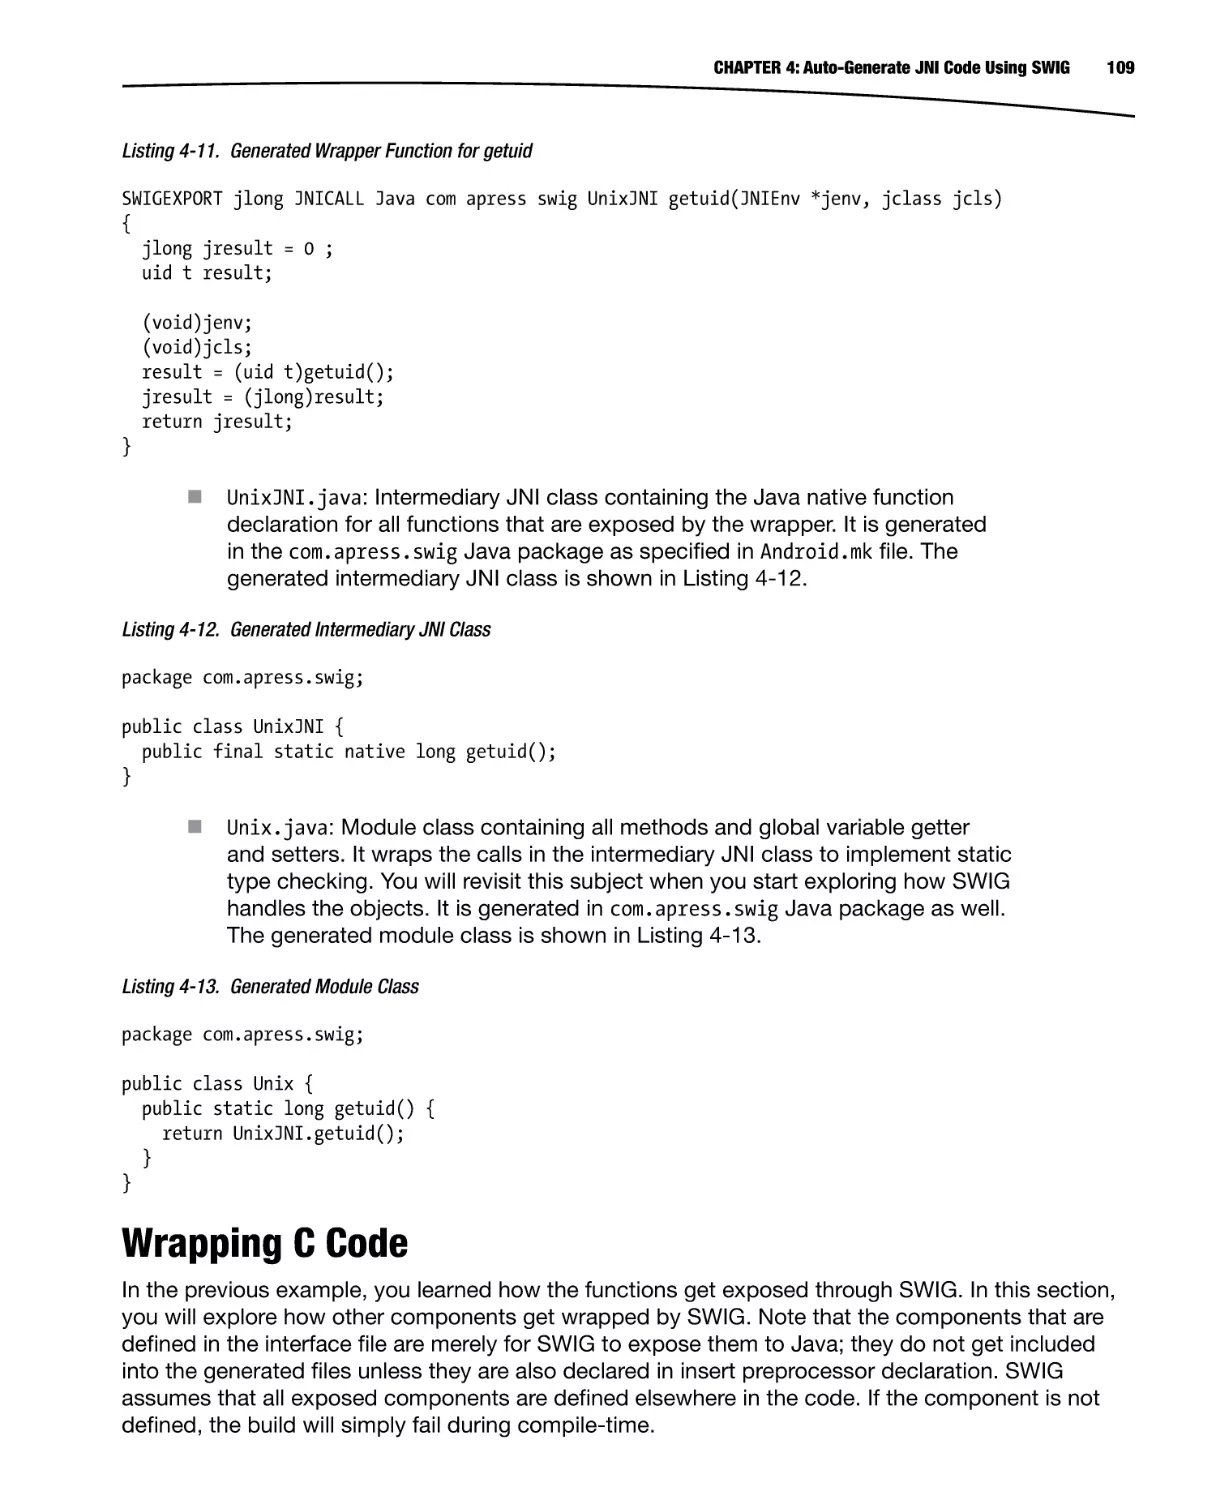 Wrapping C Code